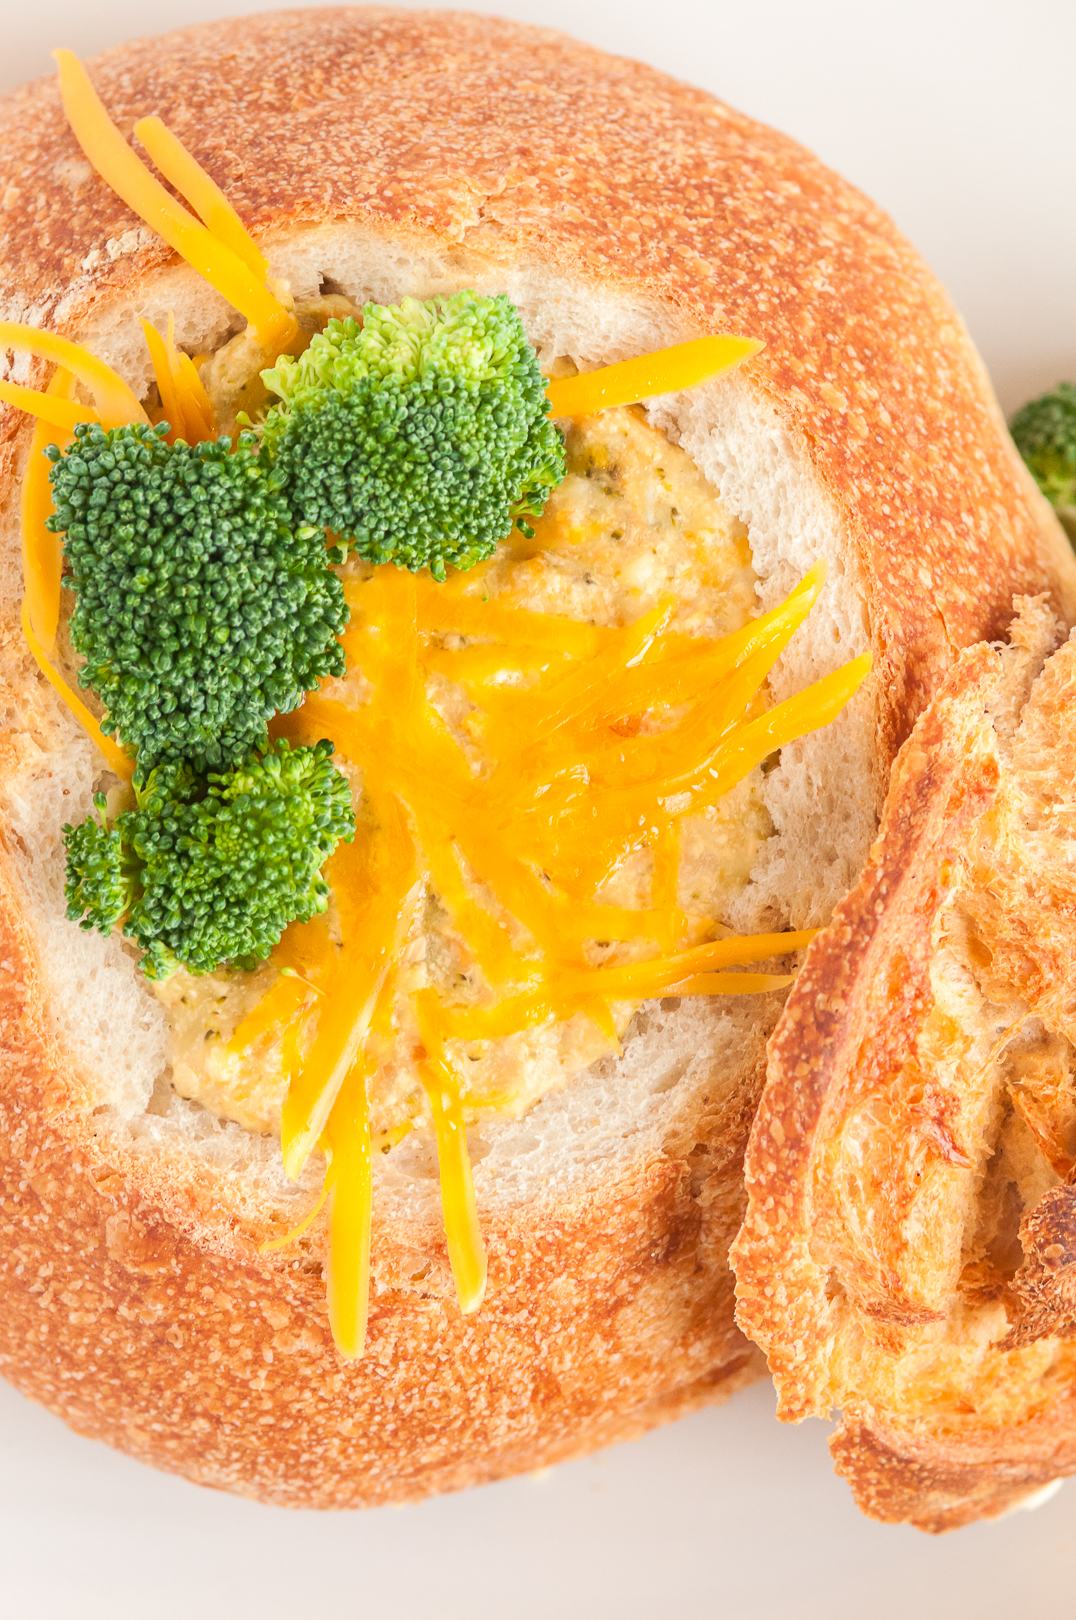 delicious soup inside of a bread bowl with cheddar and broccoli garnish